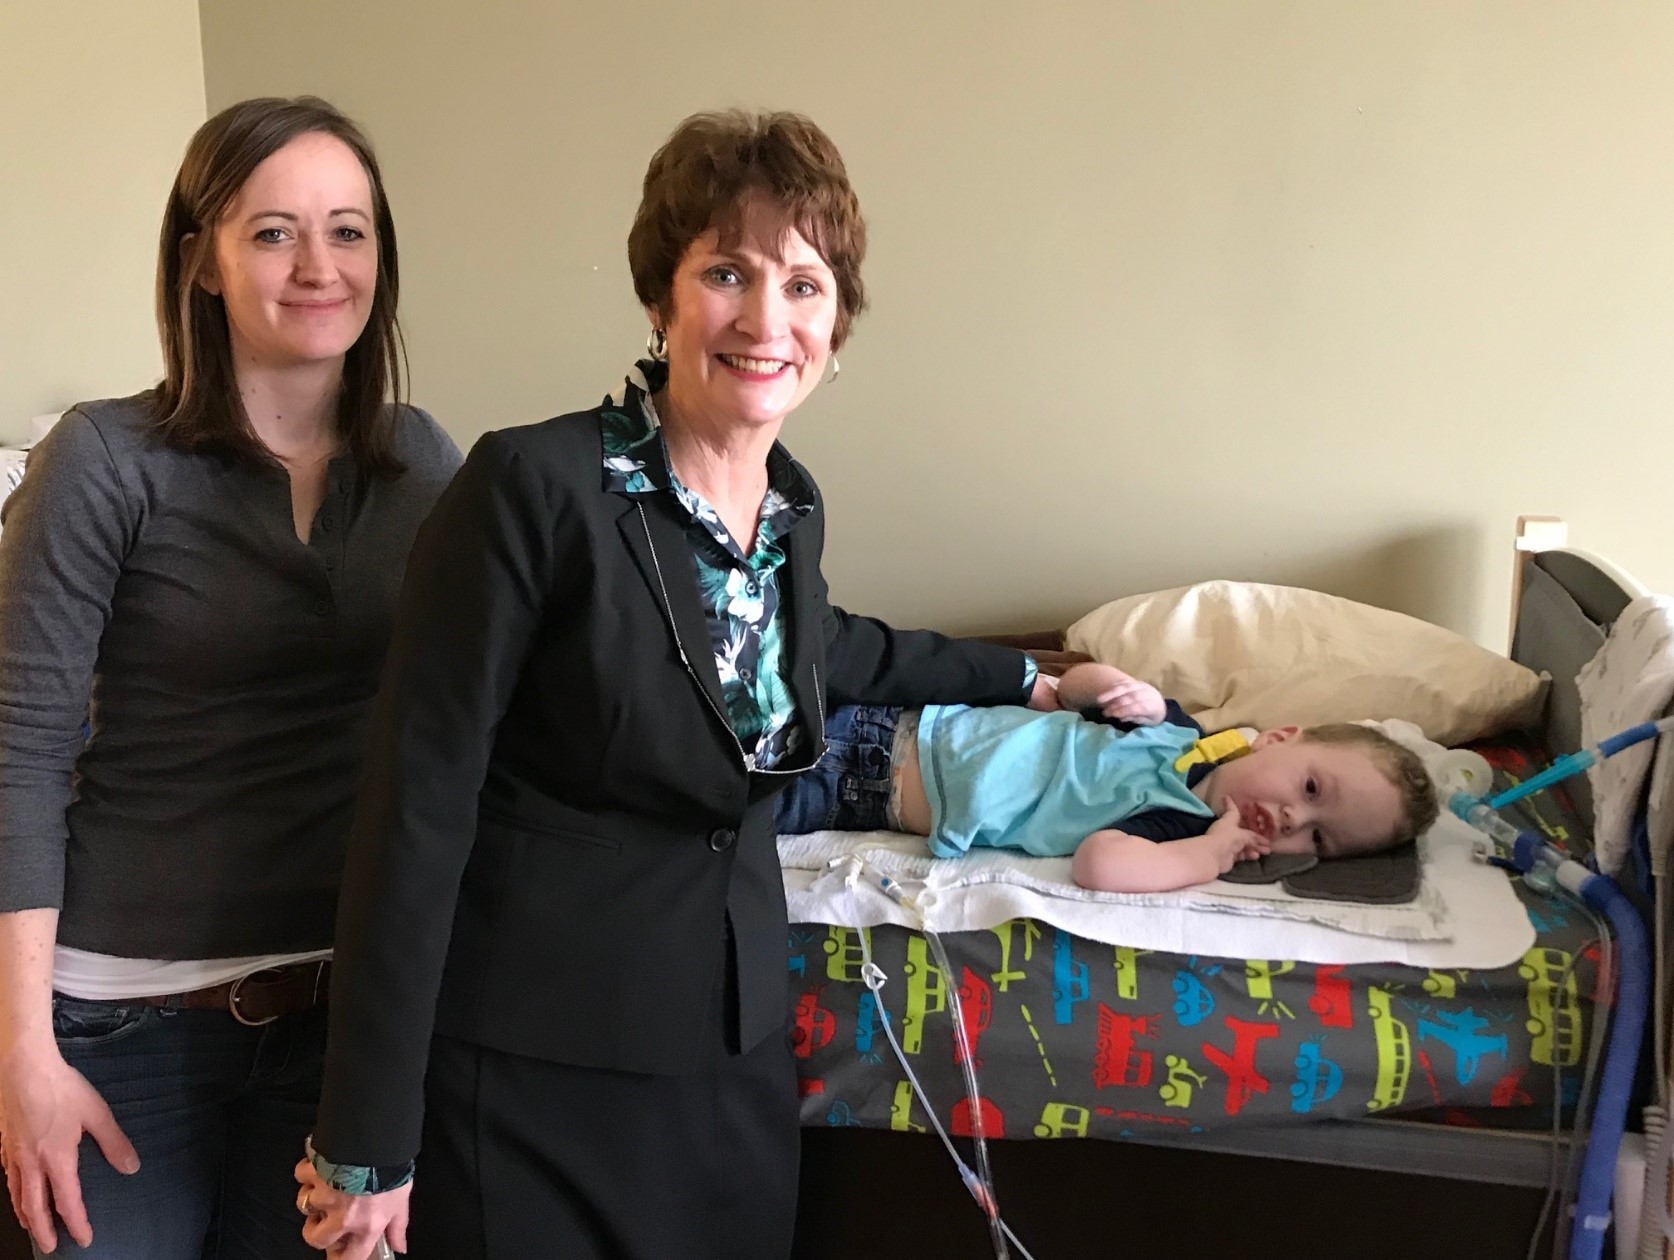 Rep. Marguerite Quinn’s home visit with a five-year old client with SMA led her to introduce a bill about newborn screening for the disease!